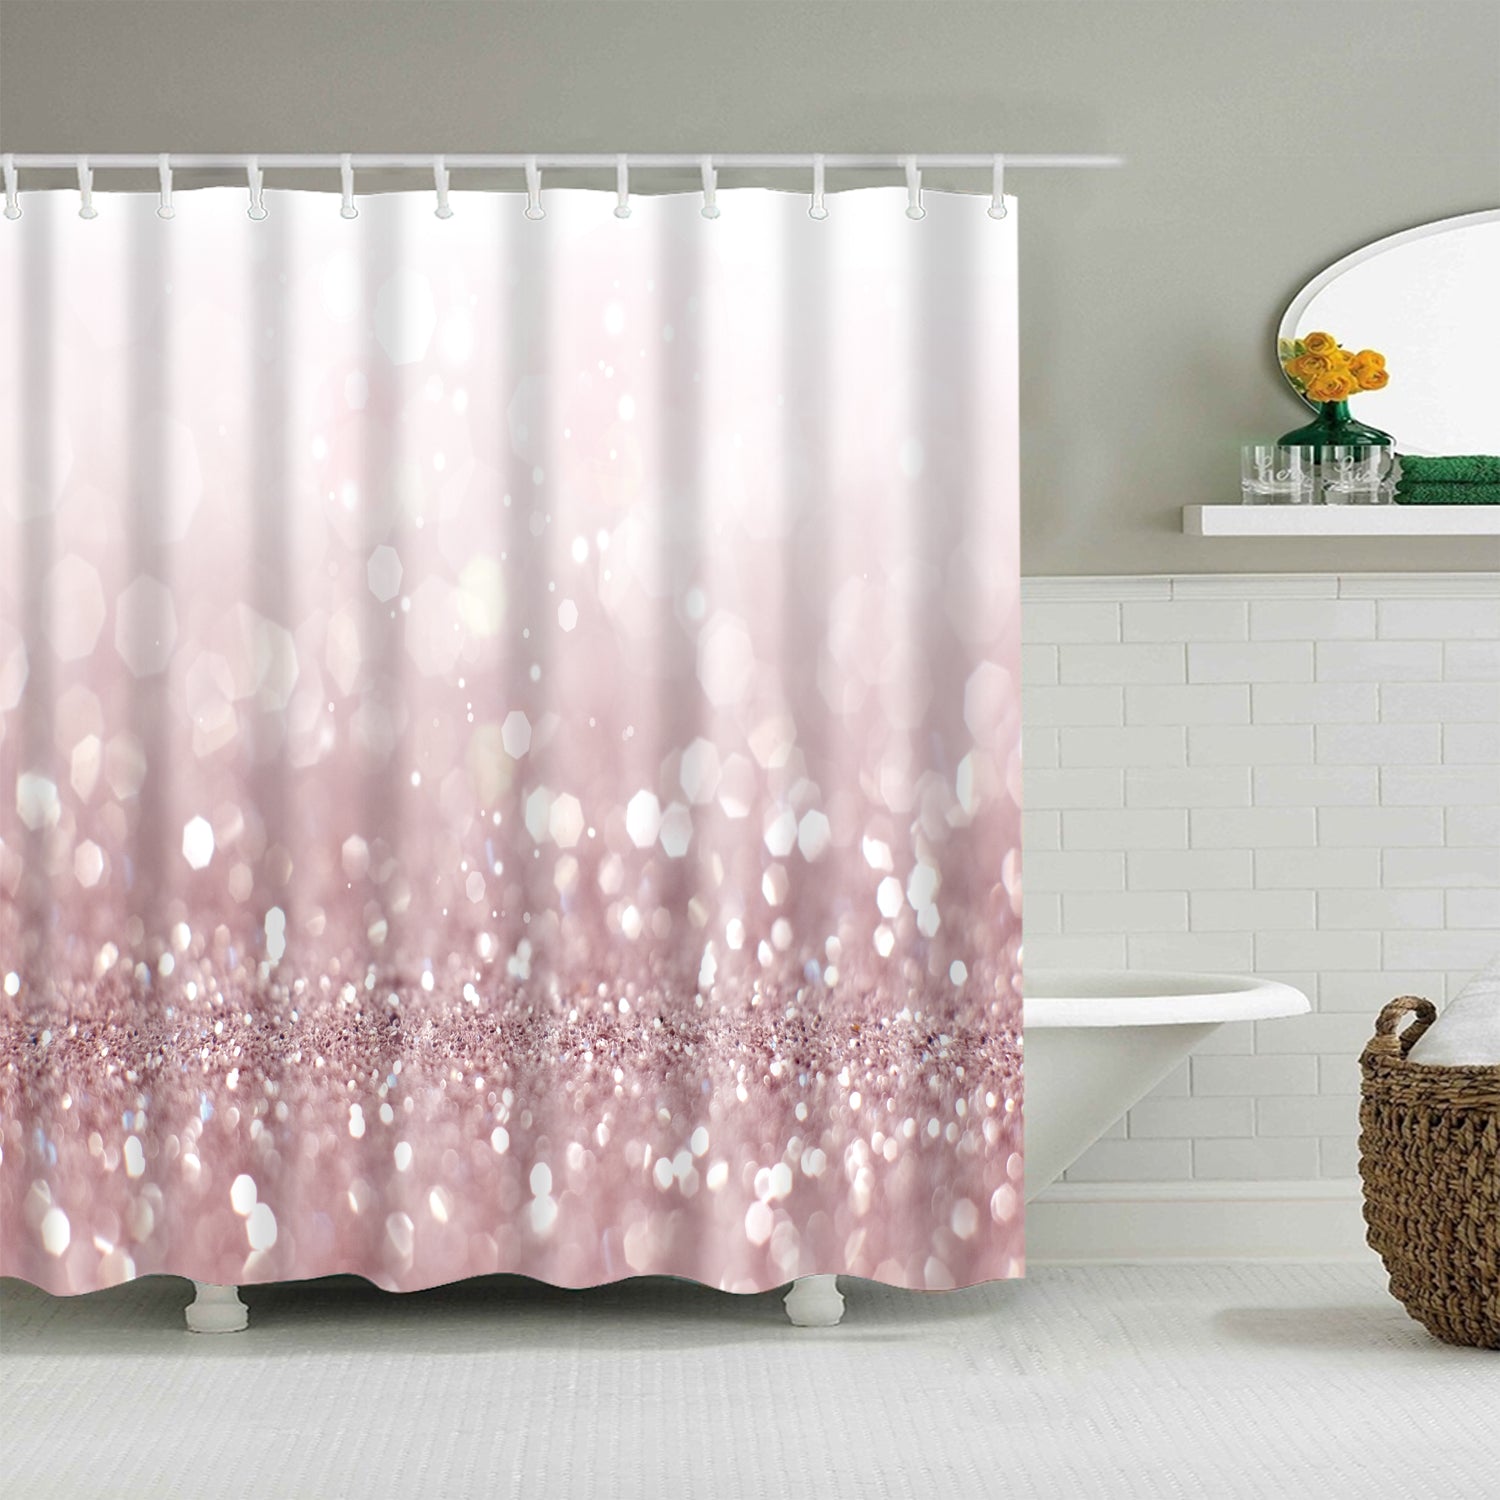 Bling Printed Sparkly Rose Pink Glitter Shower Curtain